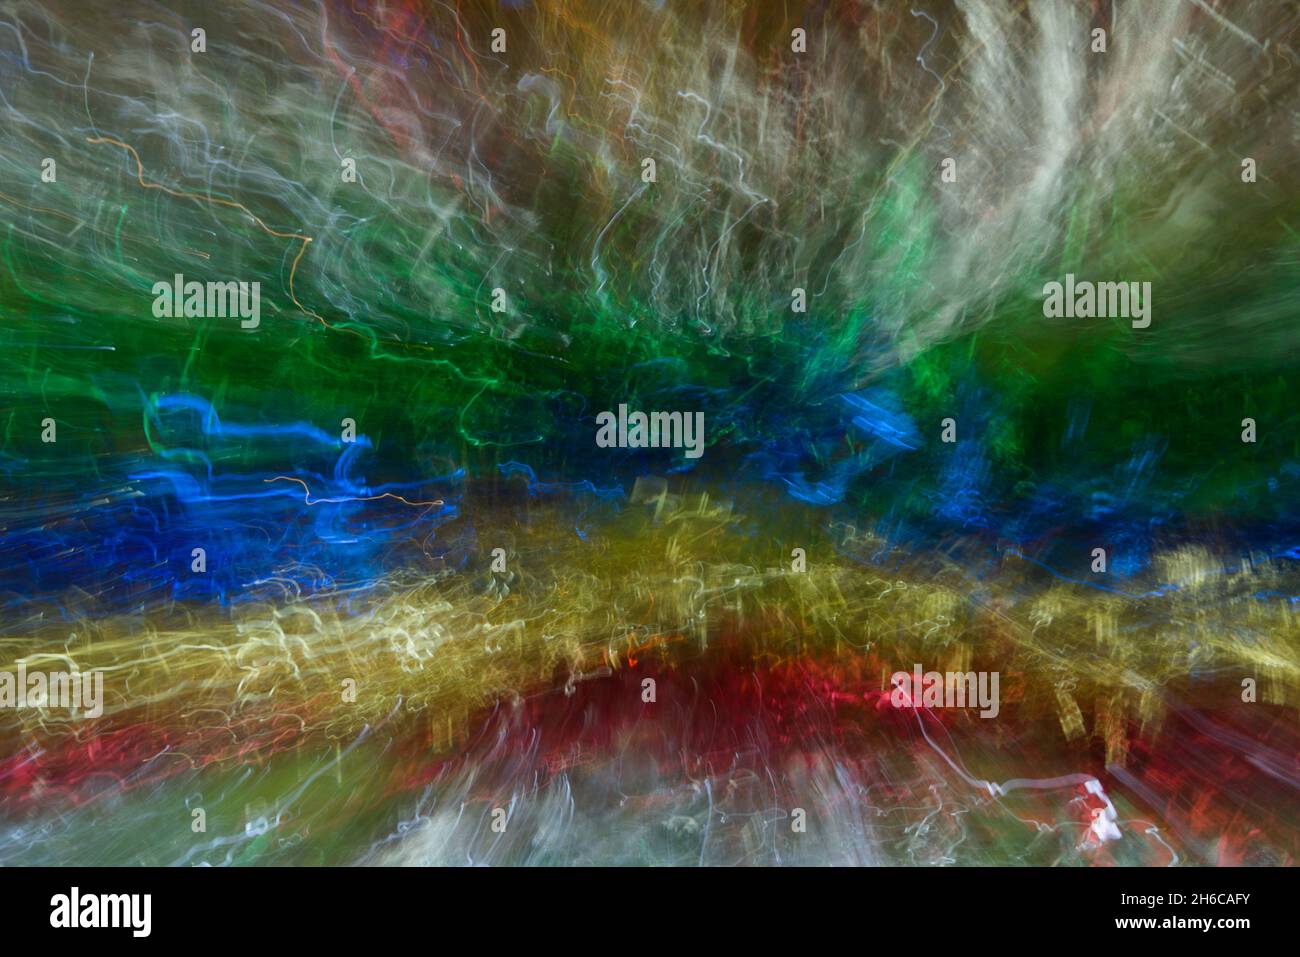 Colorful abstract of burst color fusion, metallic colors literary jumping out of the viewer.   Grabs attention, expressing patterns, textures, lines, Stock Photo